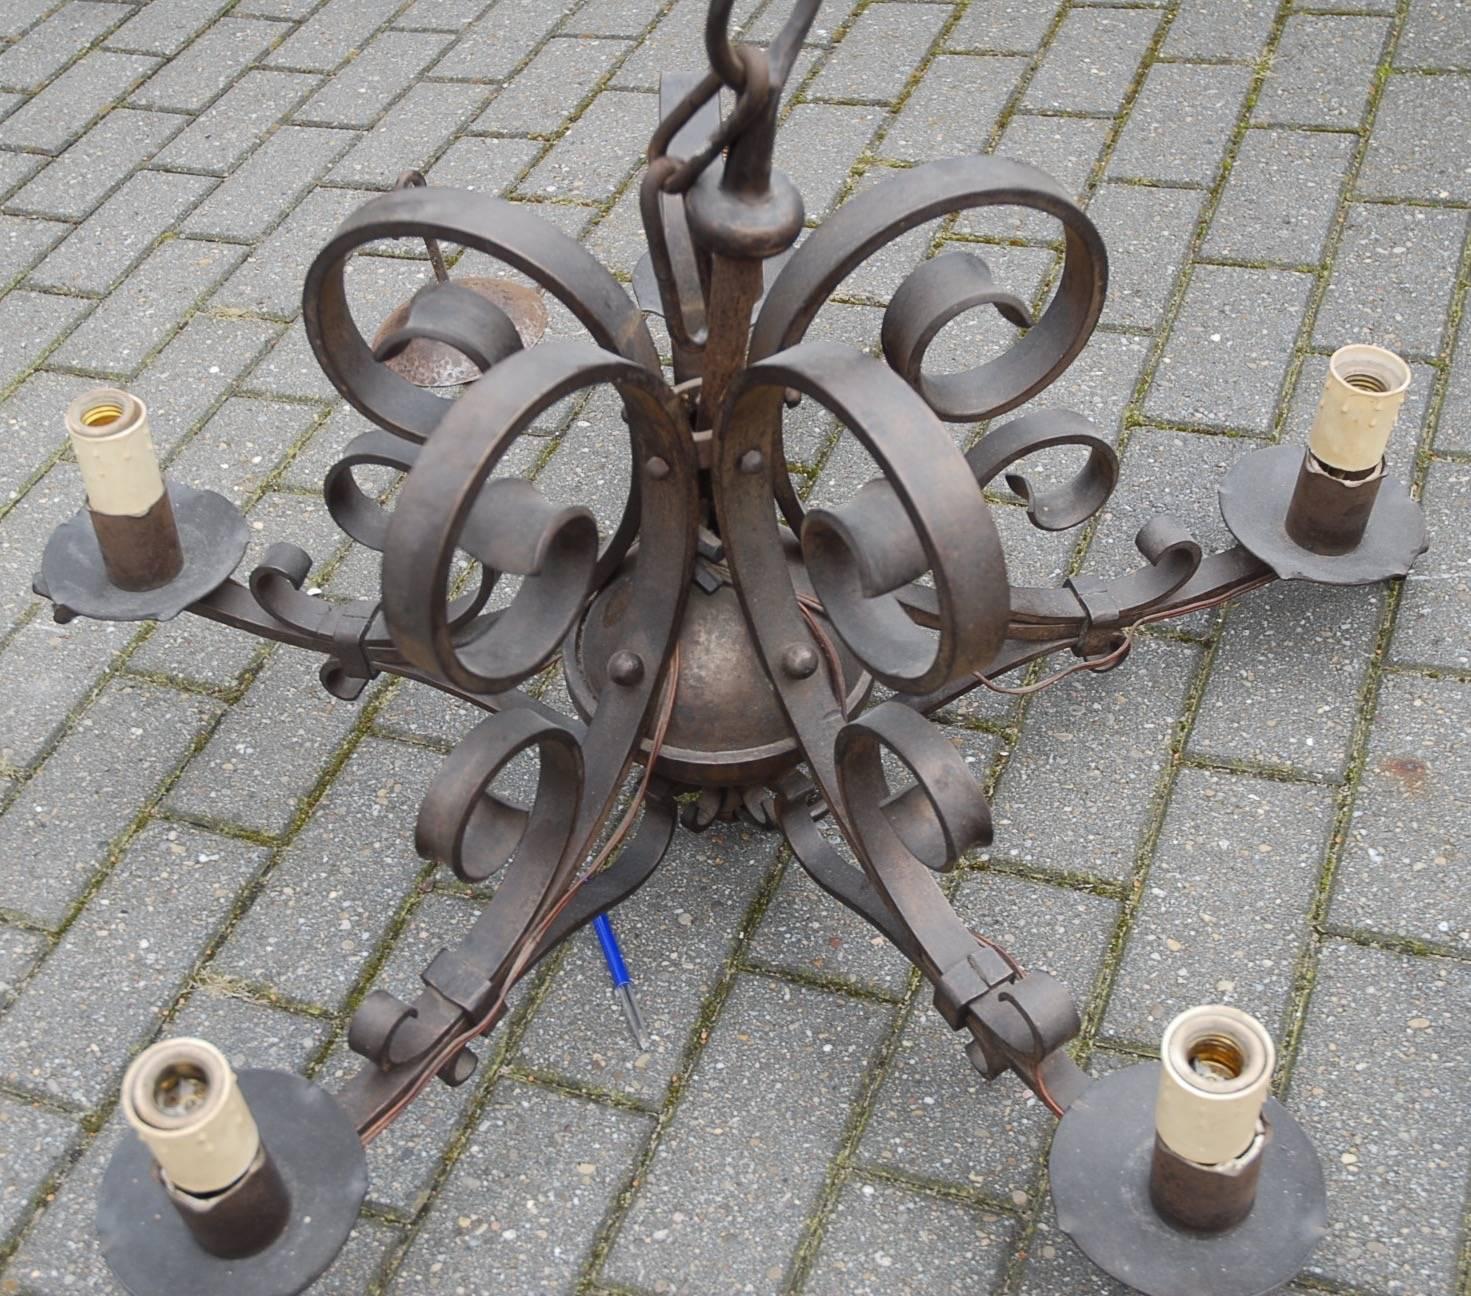 Heavy quality, handcrafted wrought iron chandelier.

This artistically designed and very well excecuted wrought iron chandelier is in excellent condition and it comes with dragon heads on all five arms. If you are looking for a statement piece